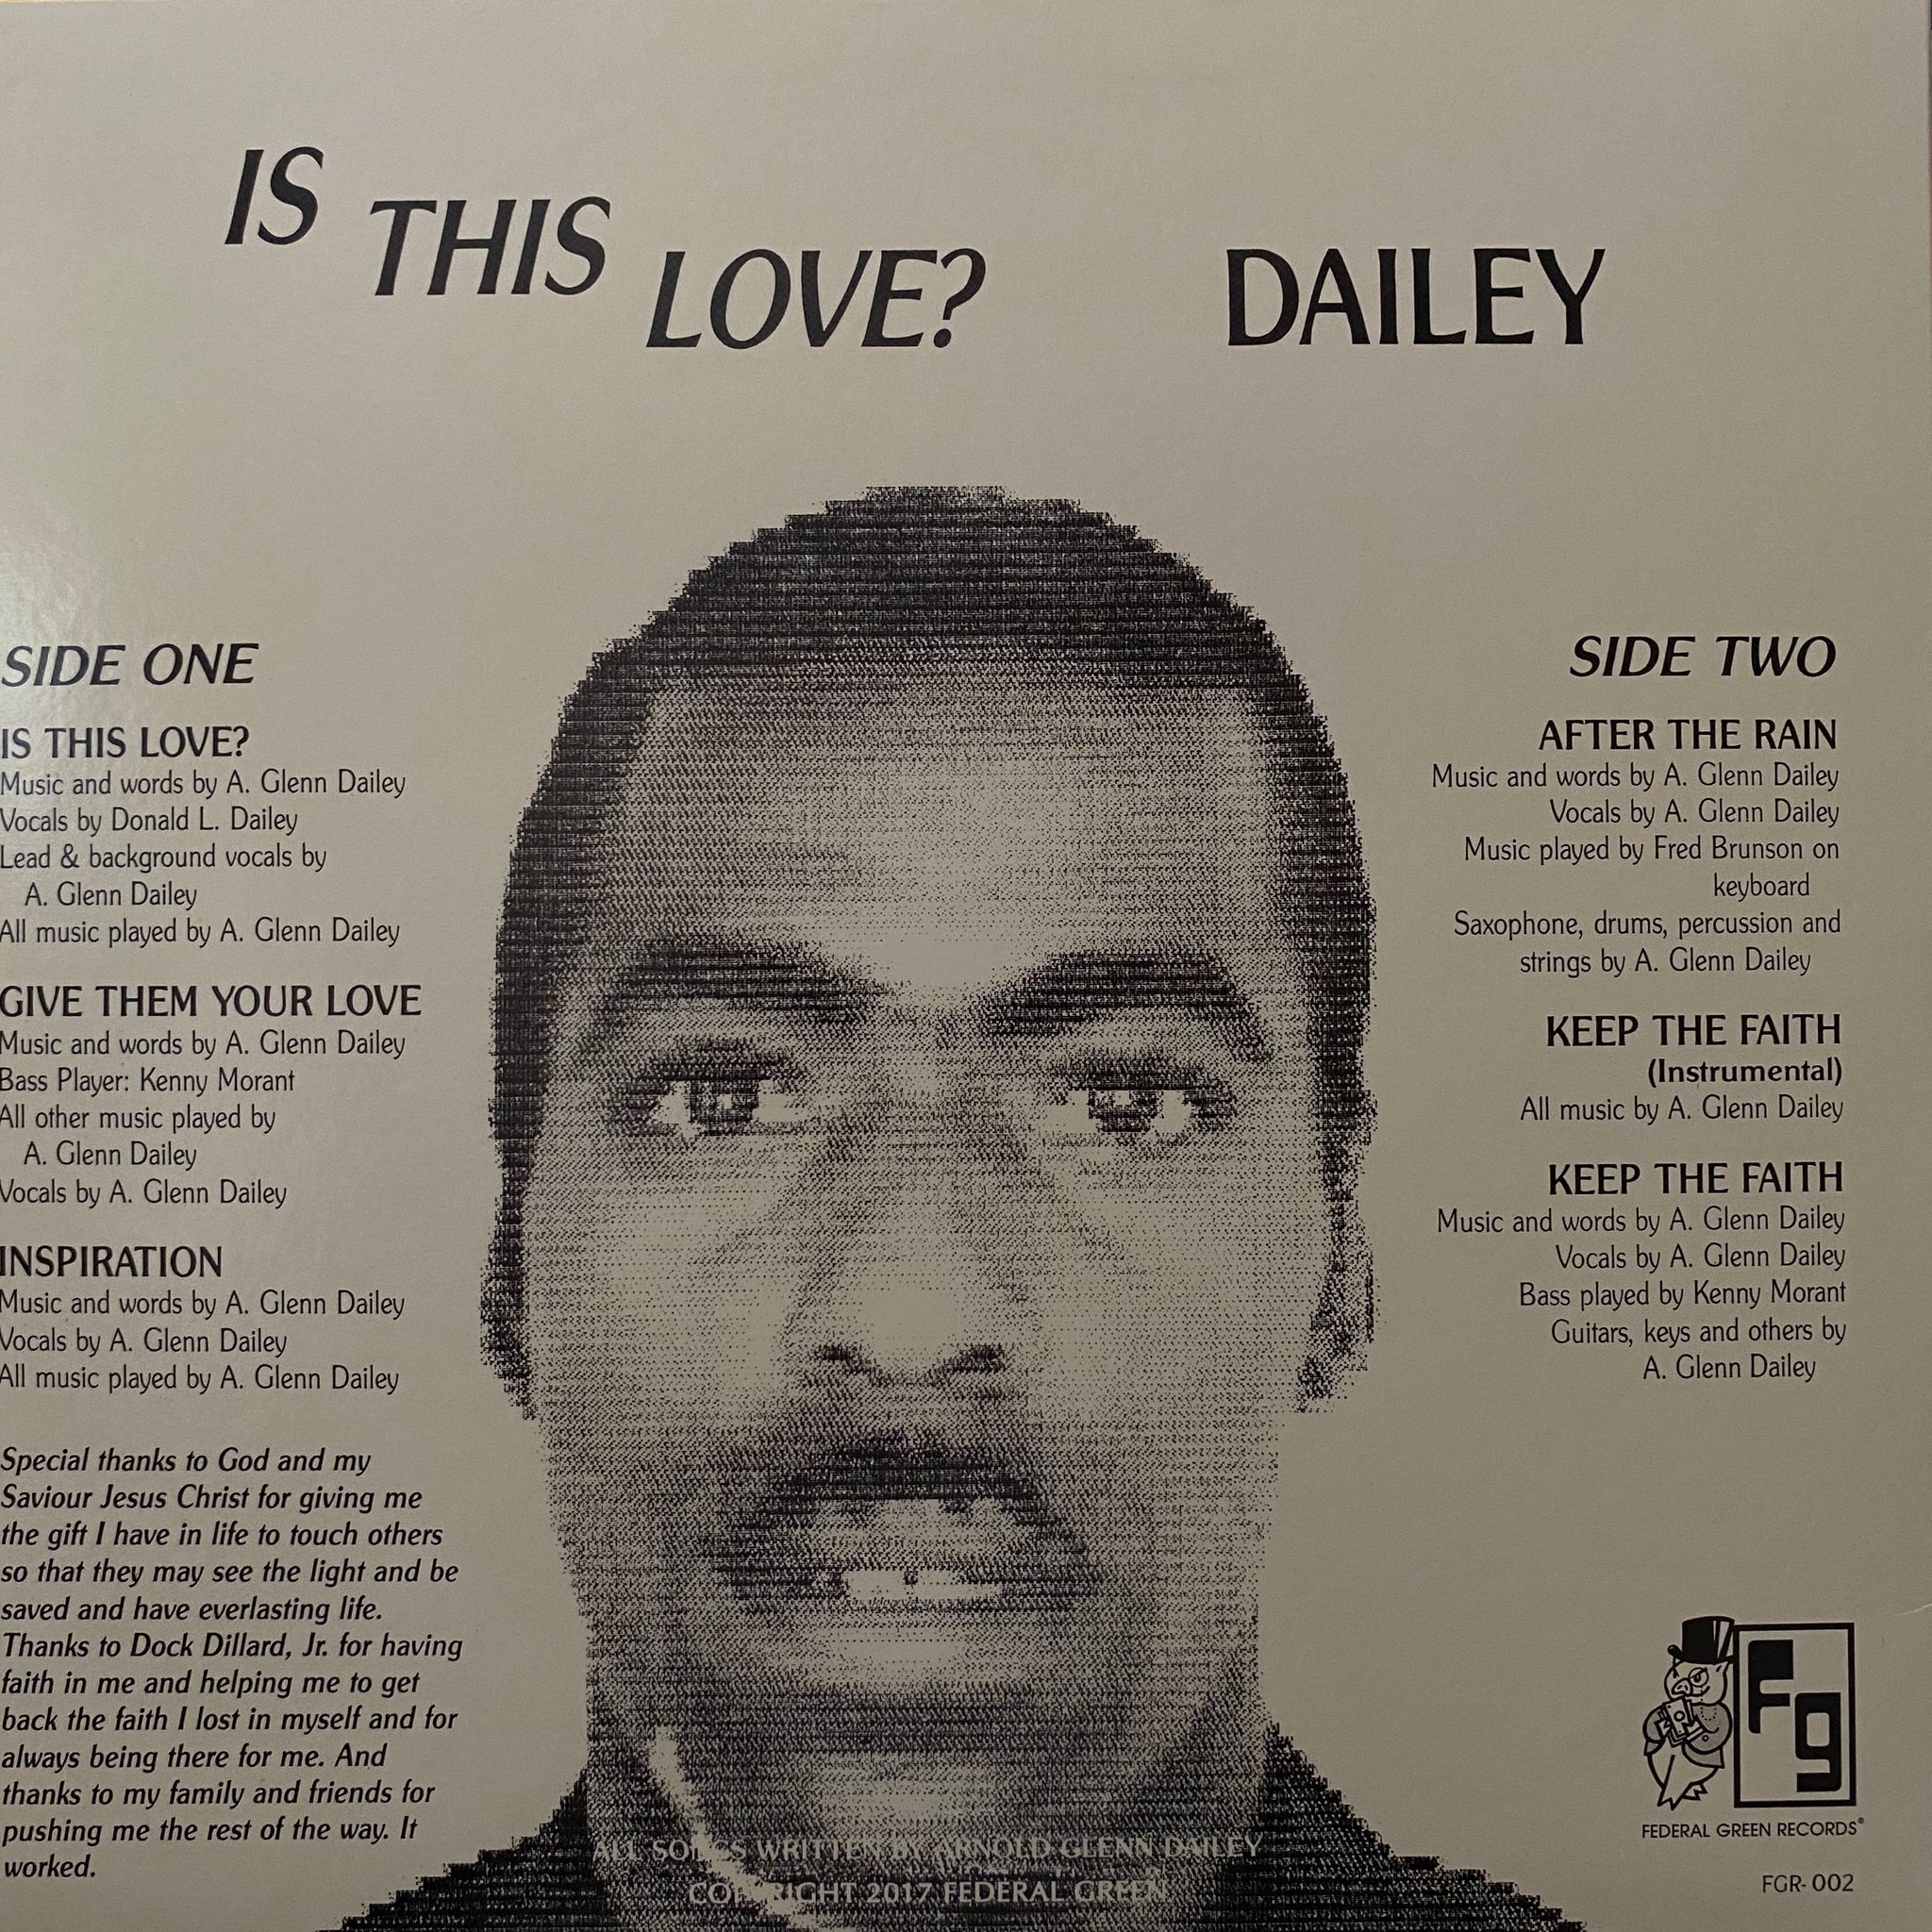 Dailey ‎– Is This Love?